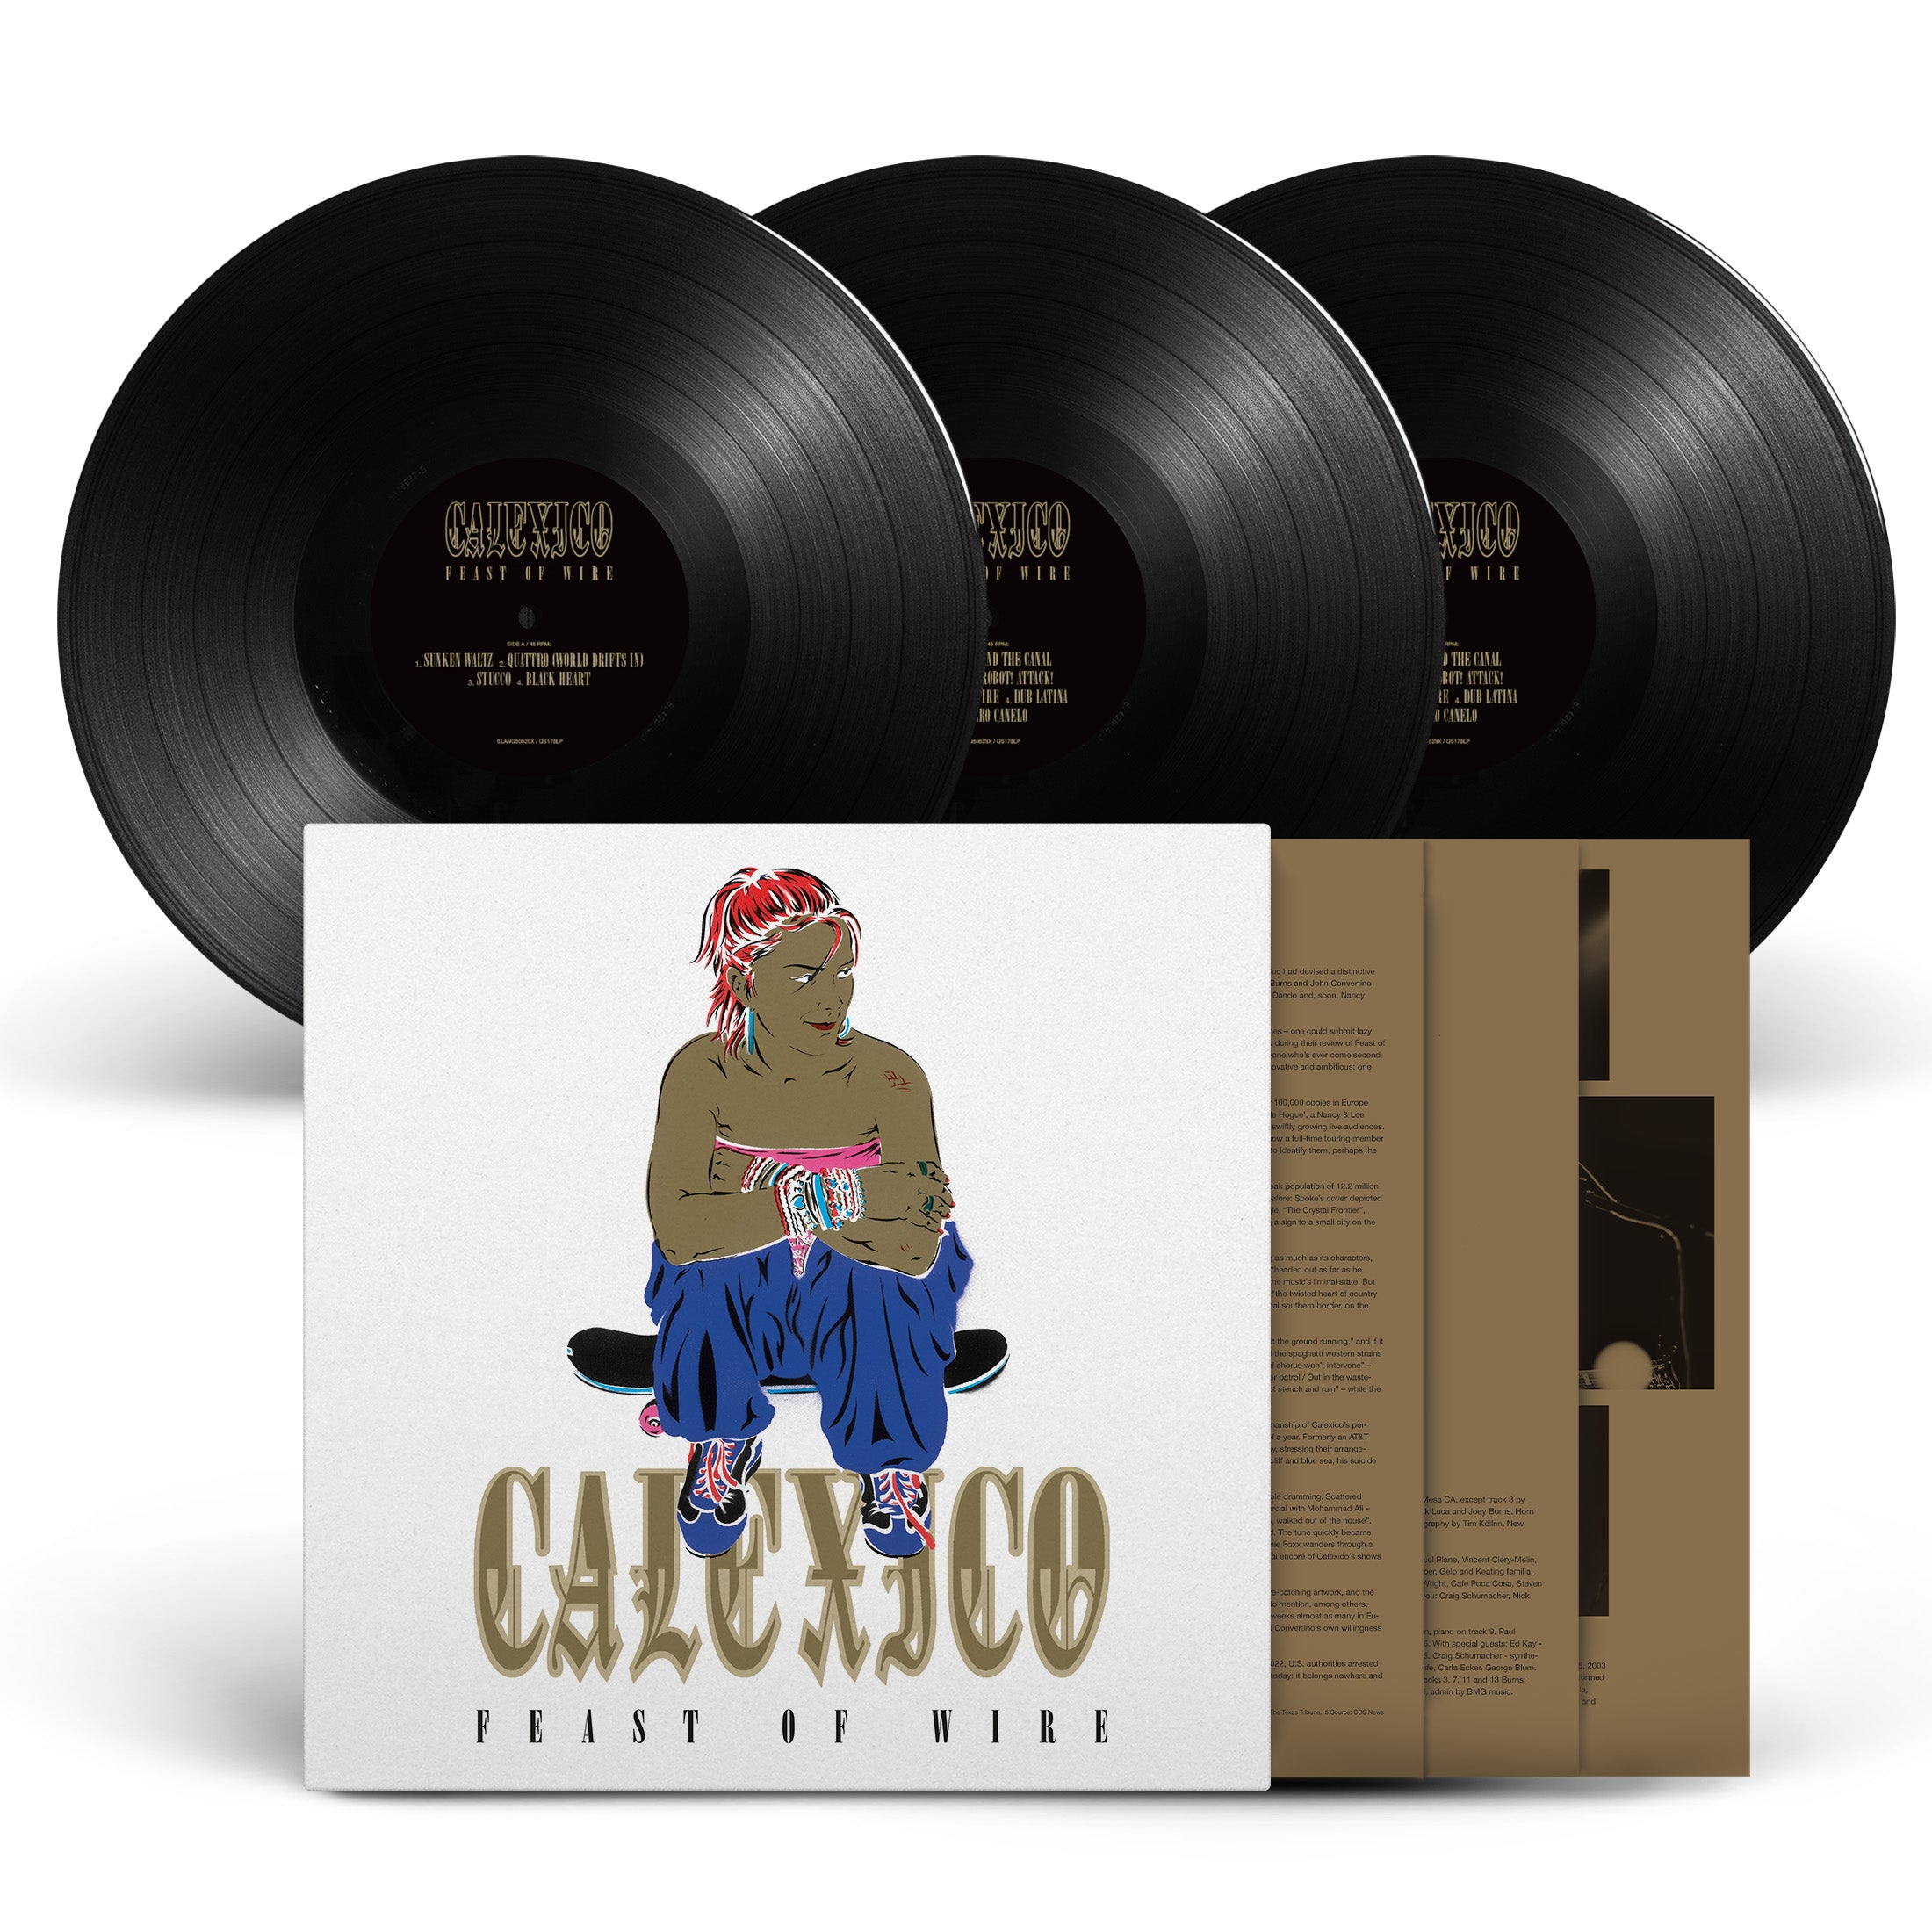 Calexico - Feast Of Wire (20th Anniversary Edition): Vinyl 3LP